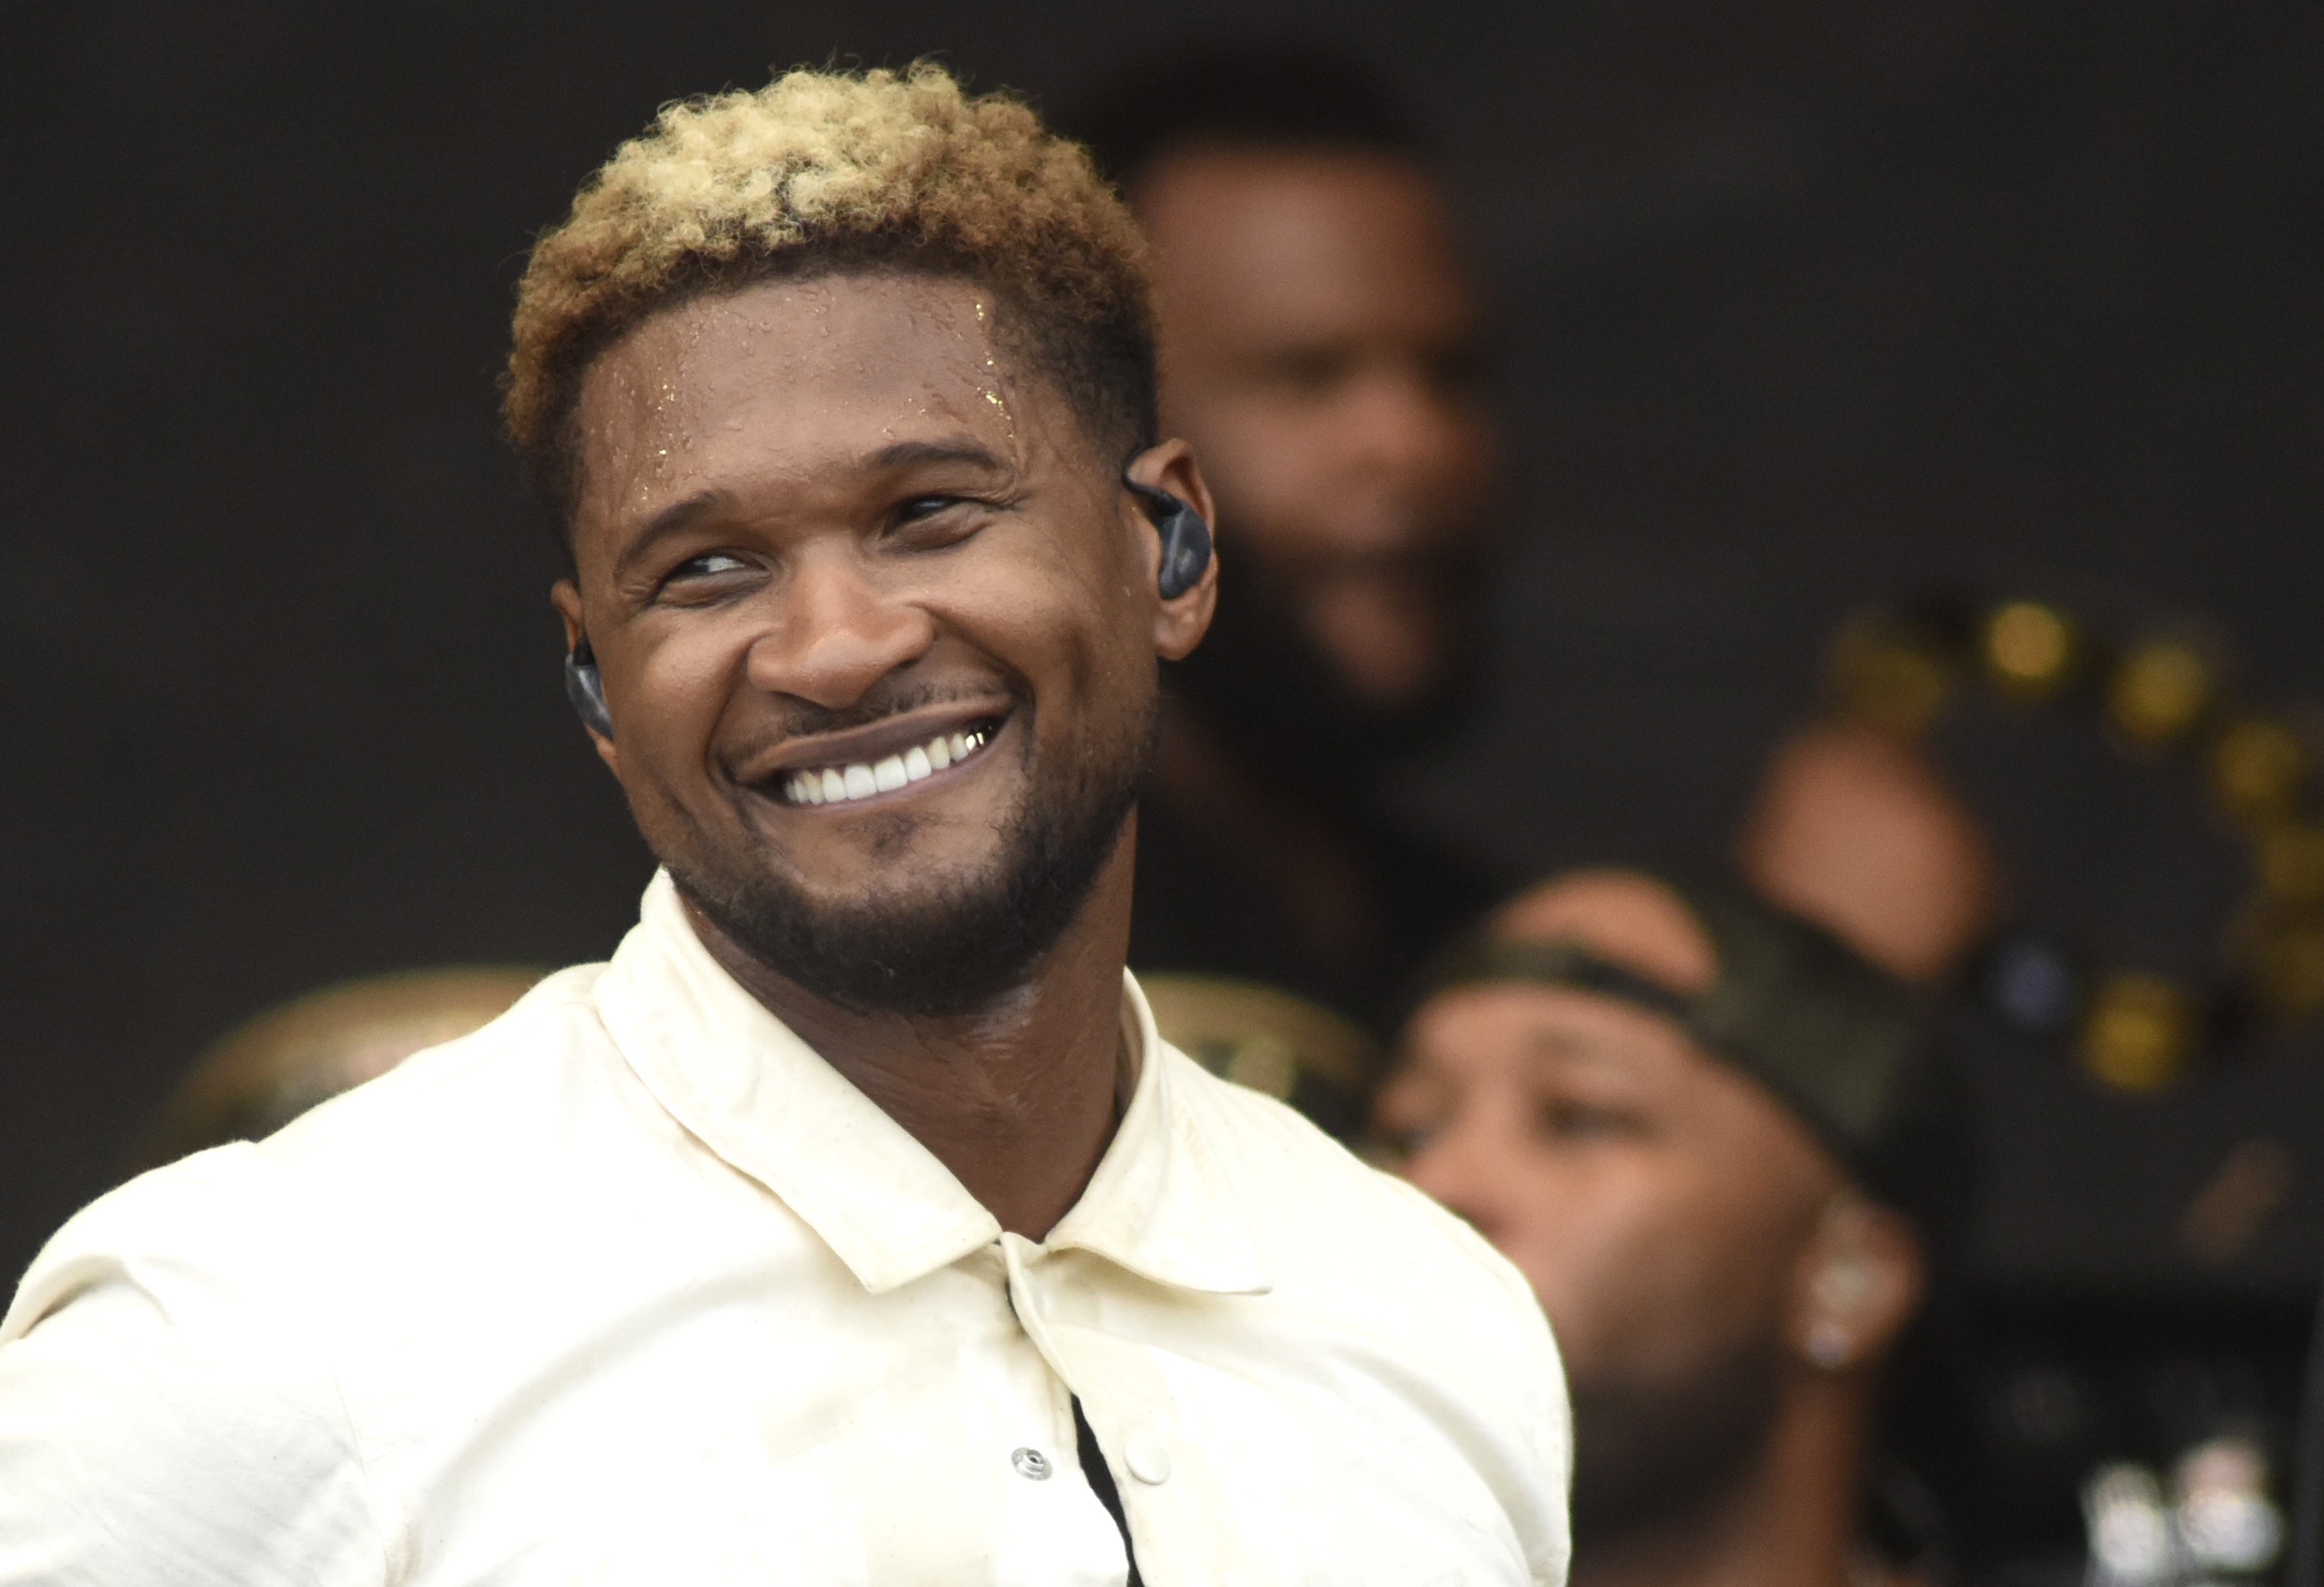 We May Now Know The Woman Who Inspired Usher's Hit Song, 'My Boo'